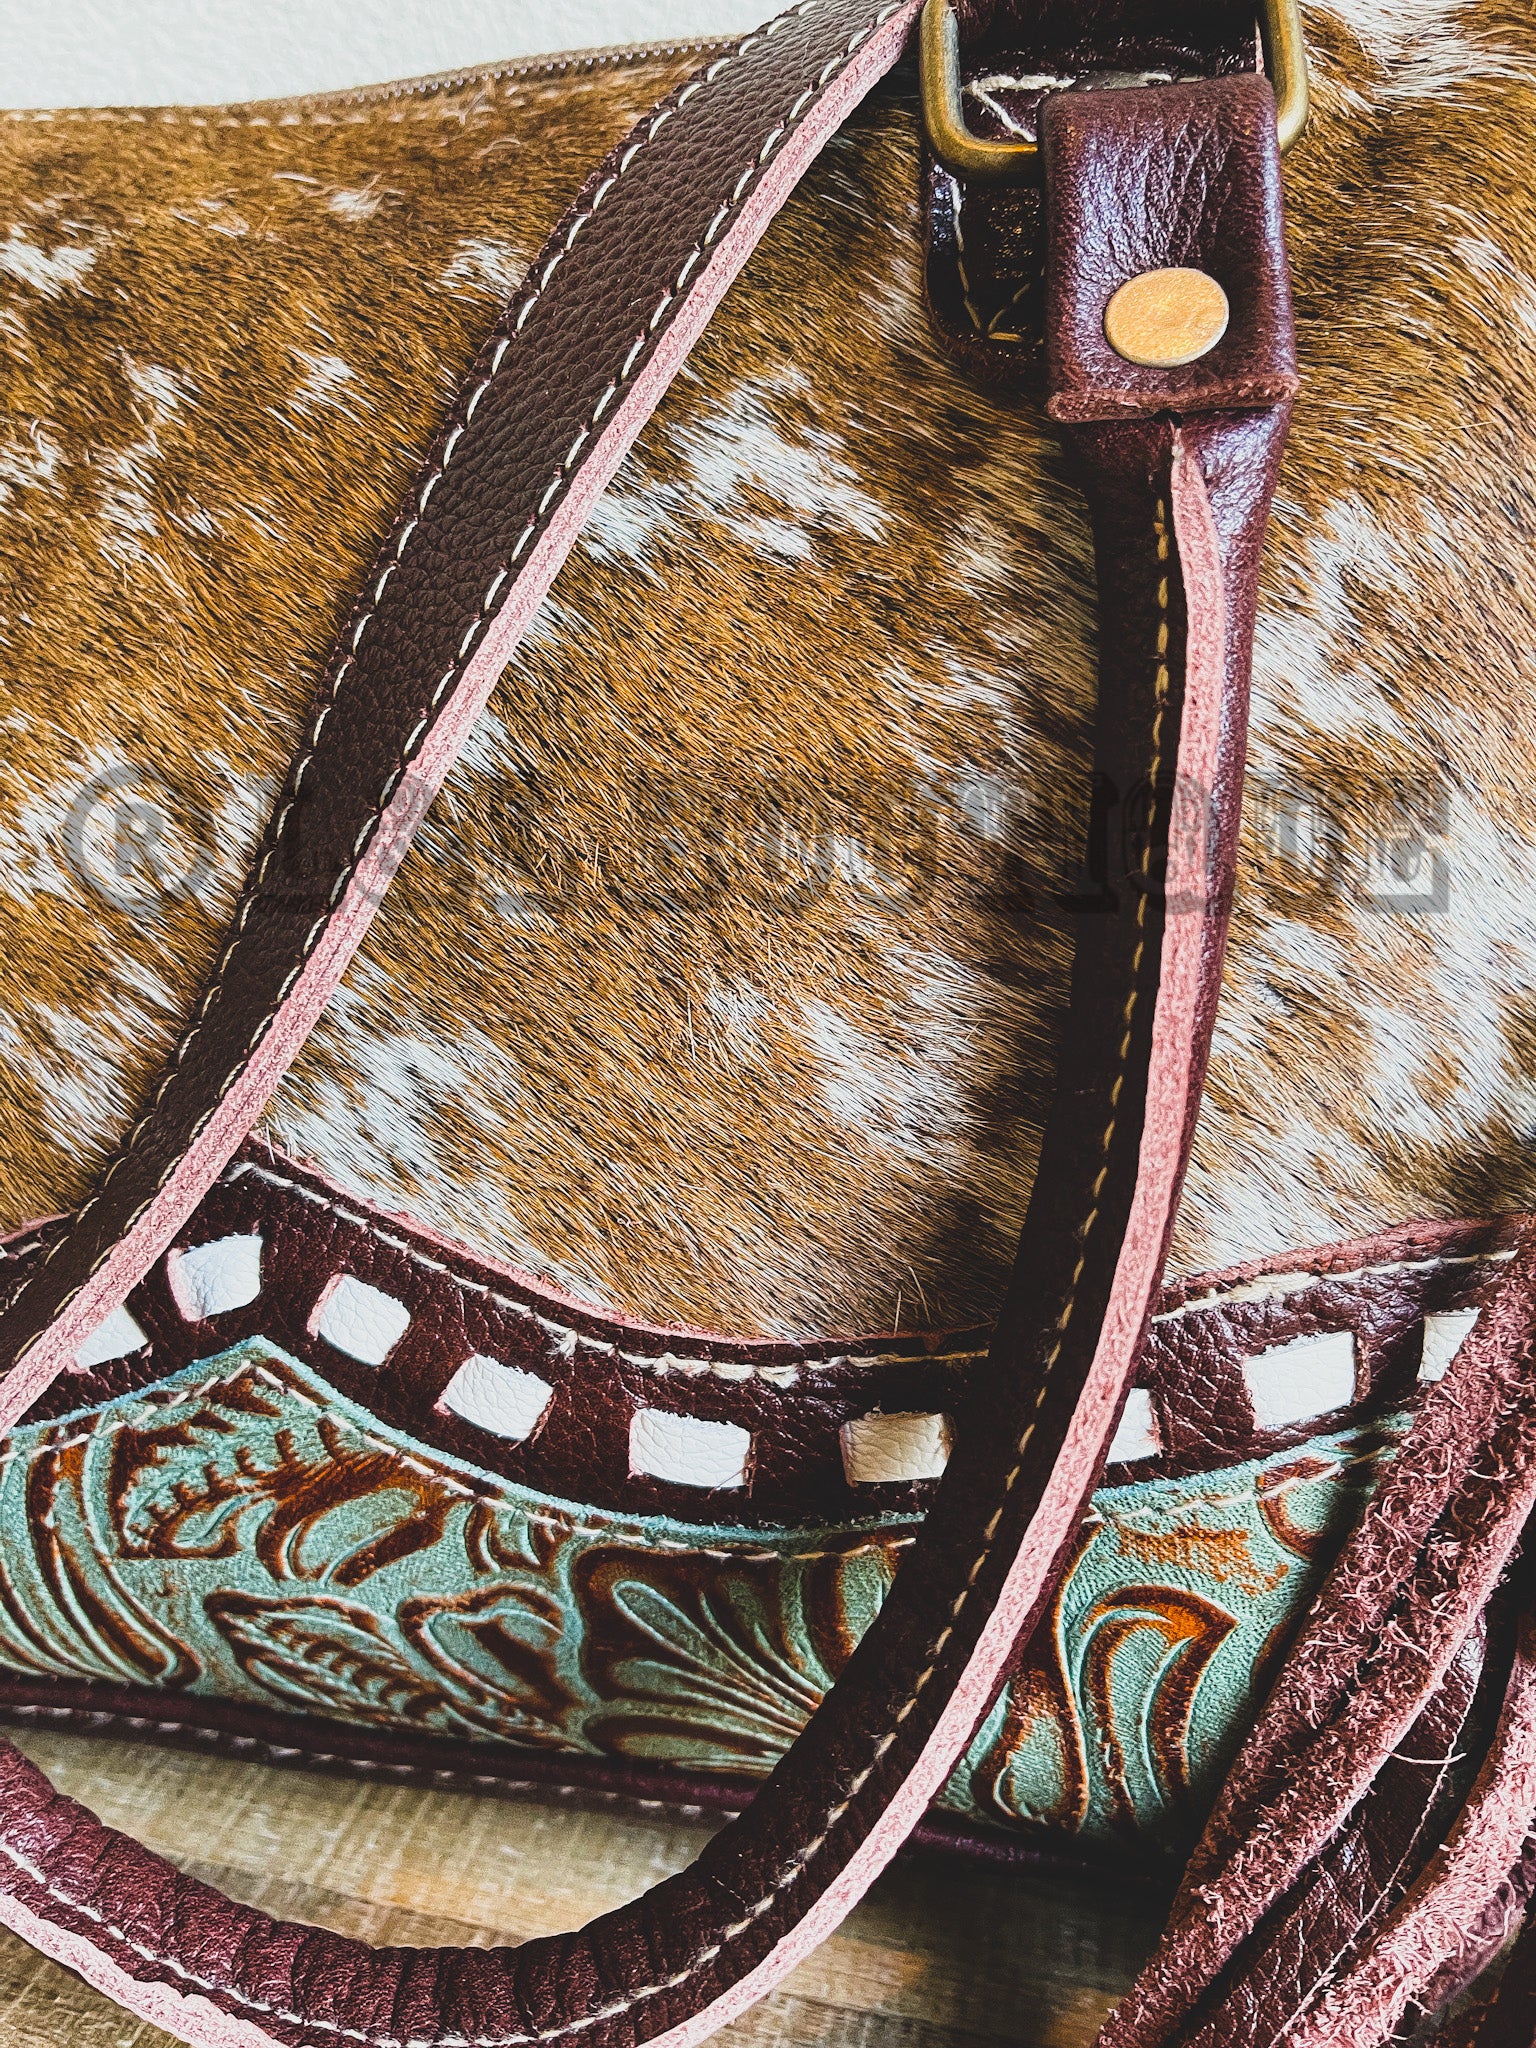 Recycled lariat rope handles on cowhide bag. Just the right size!  www.diamond57.com | Cowhide purse, Cowhide bag, Western bag